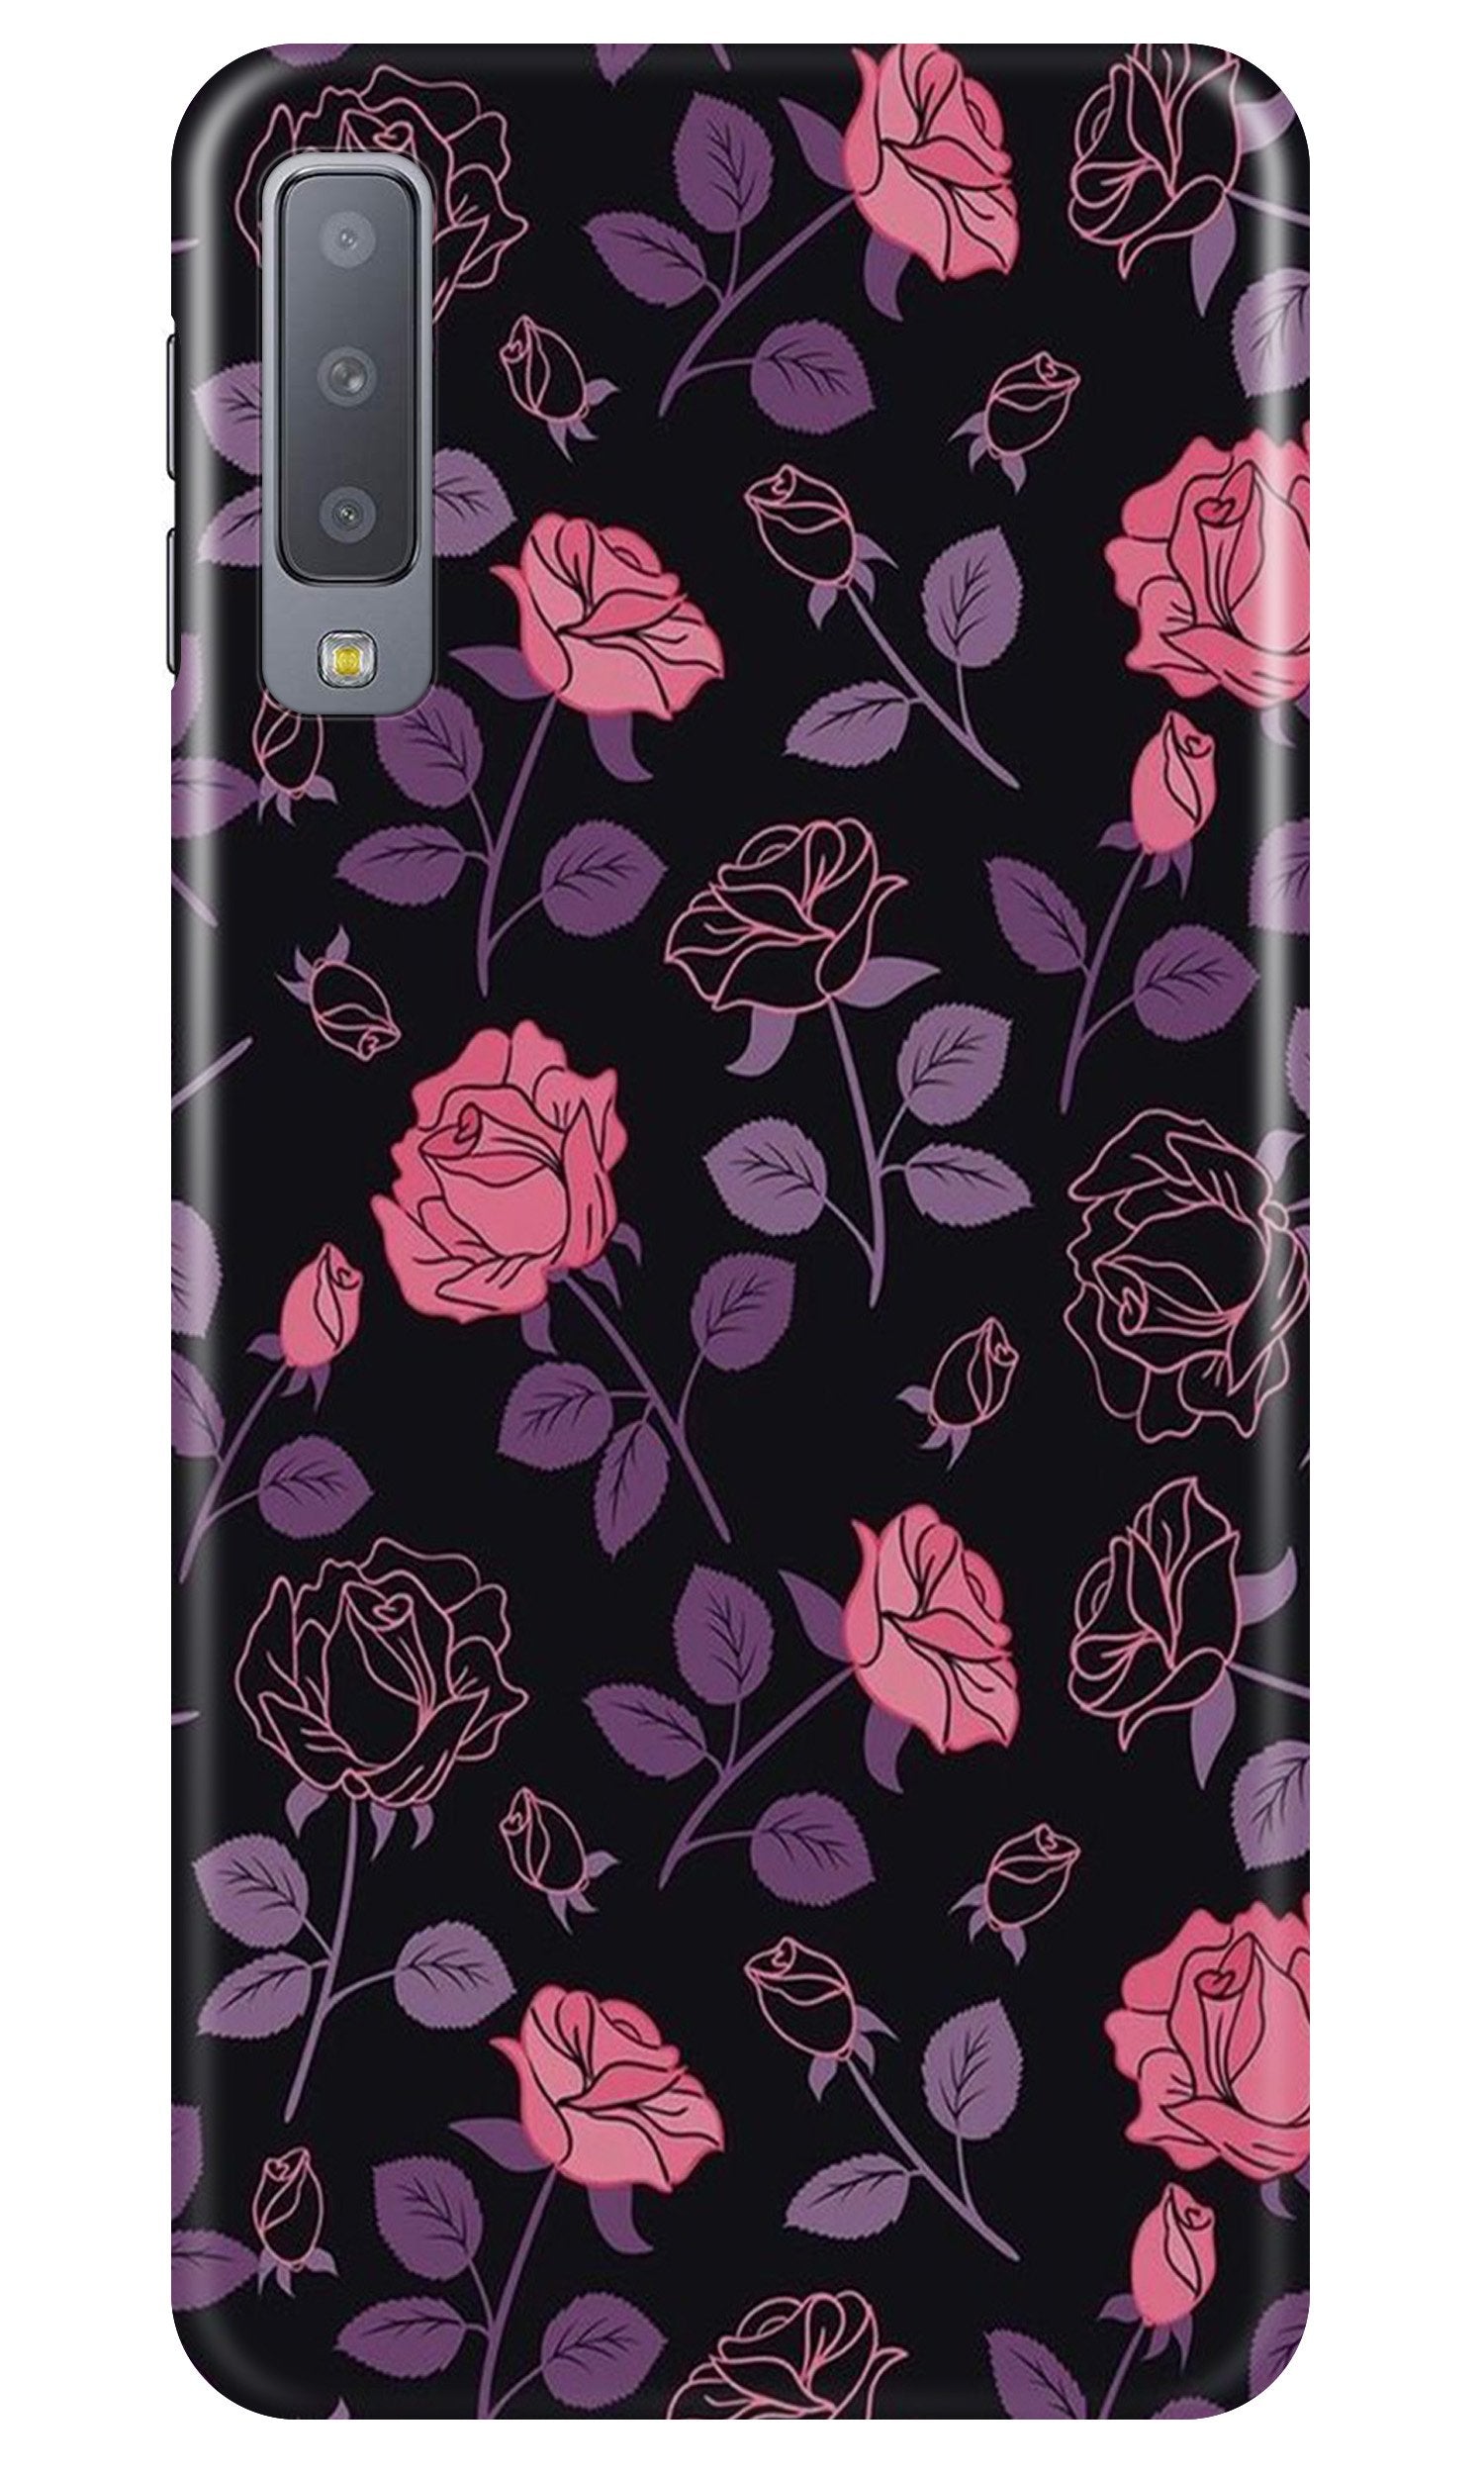 Rose Black Background Case for Samung Galaxy A70s